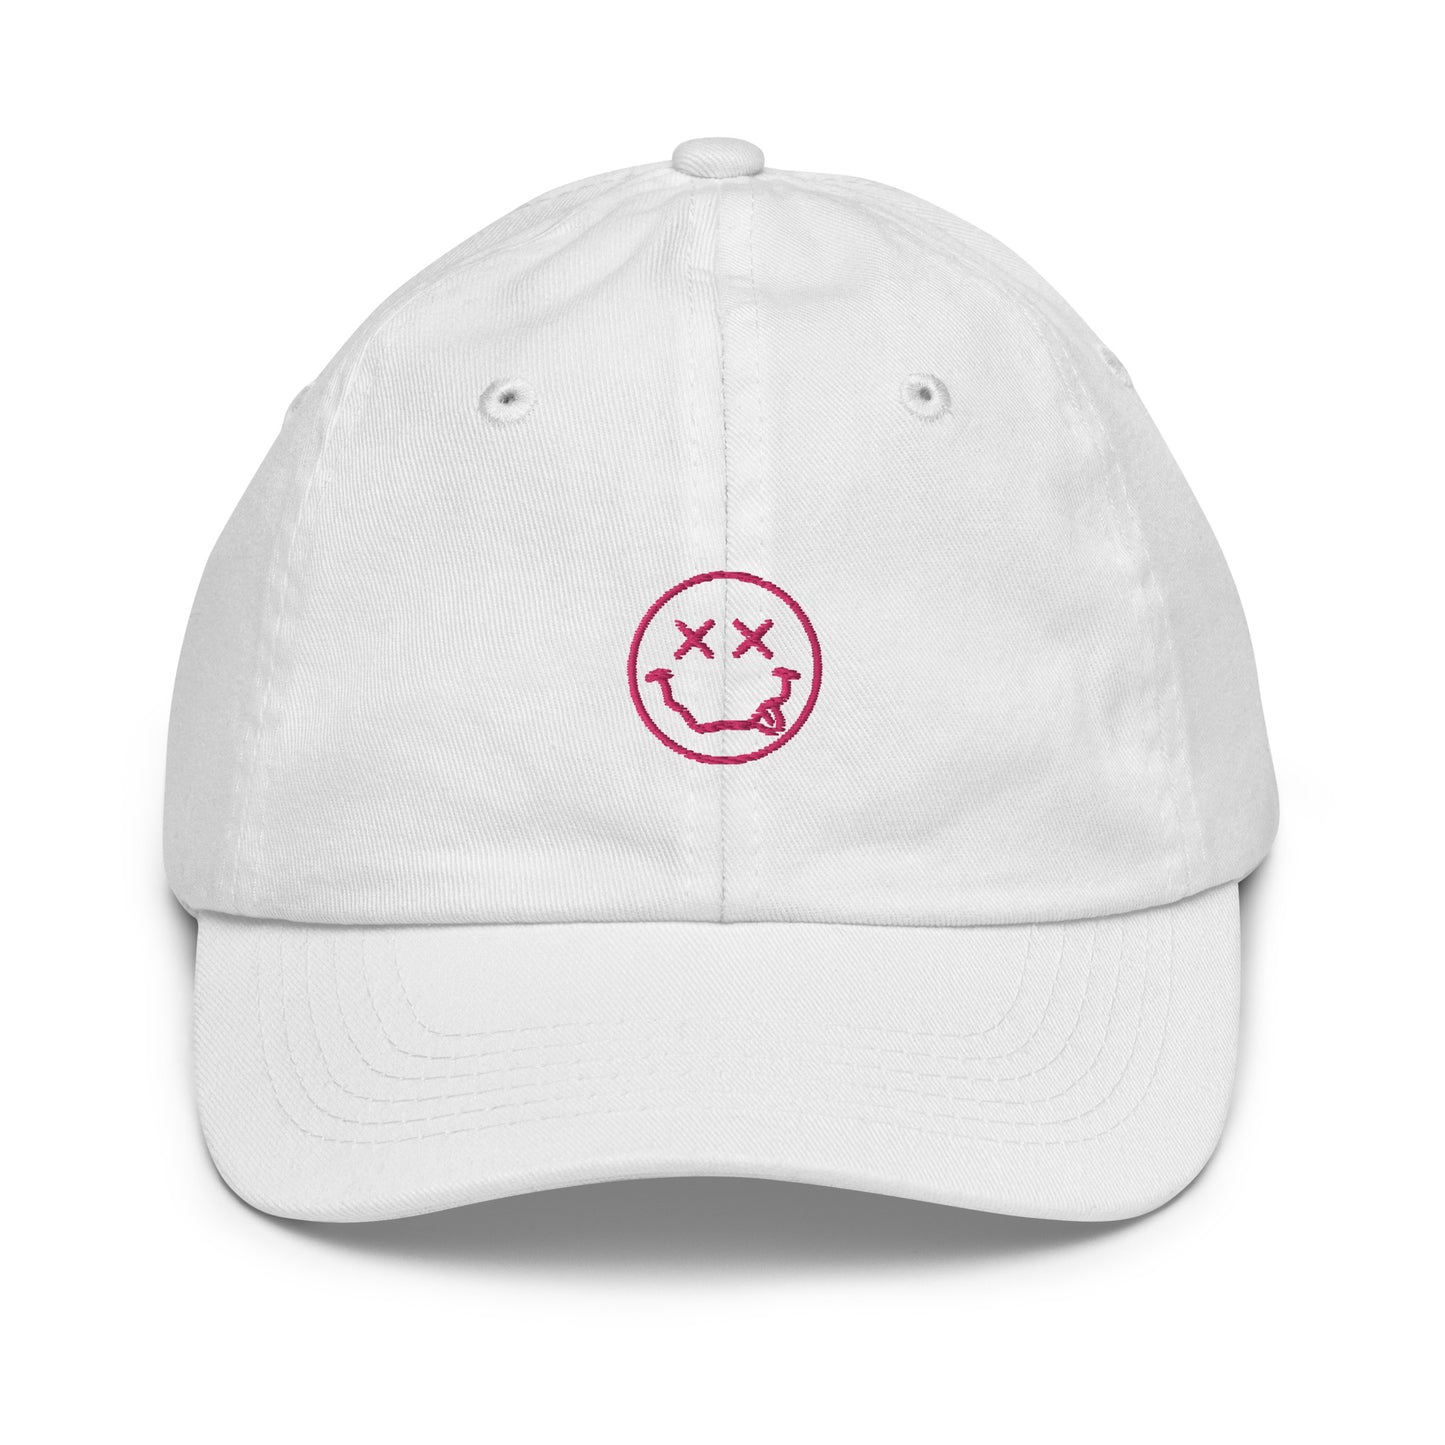 Dead smiley pink youth hat